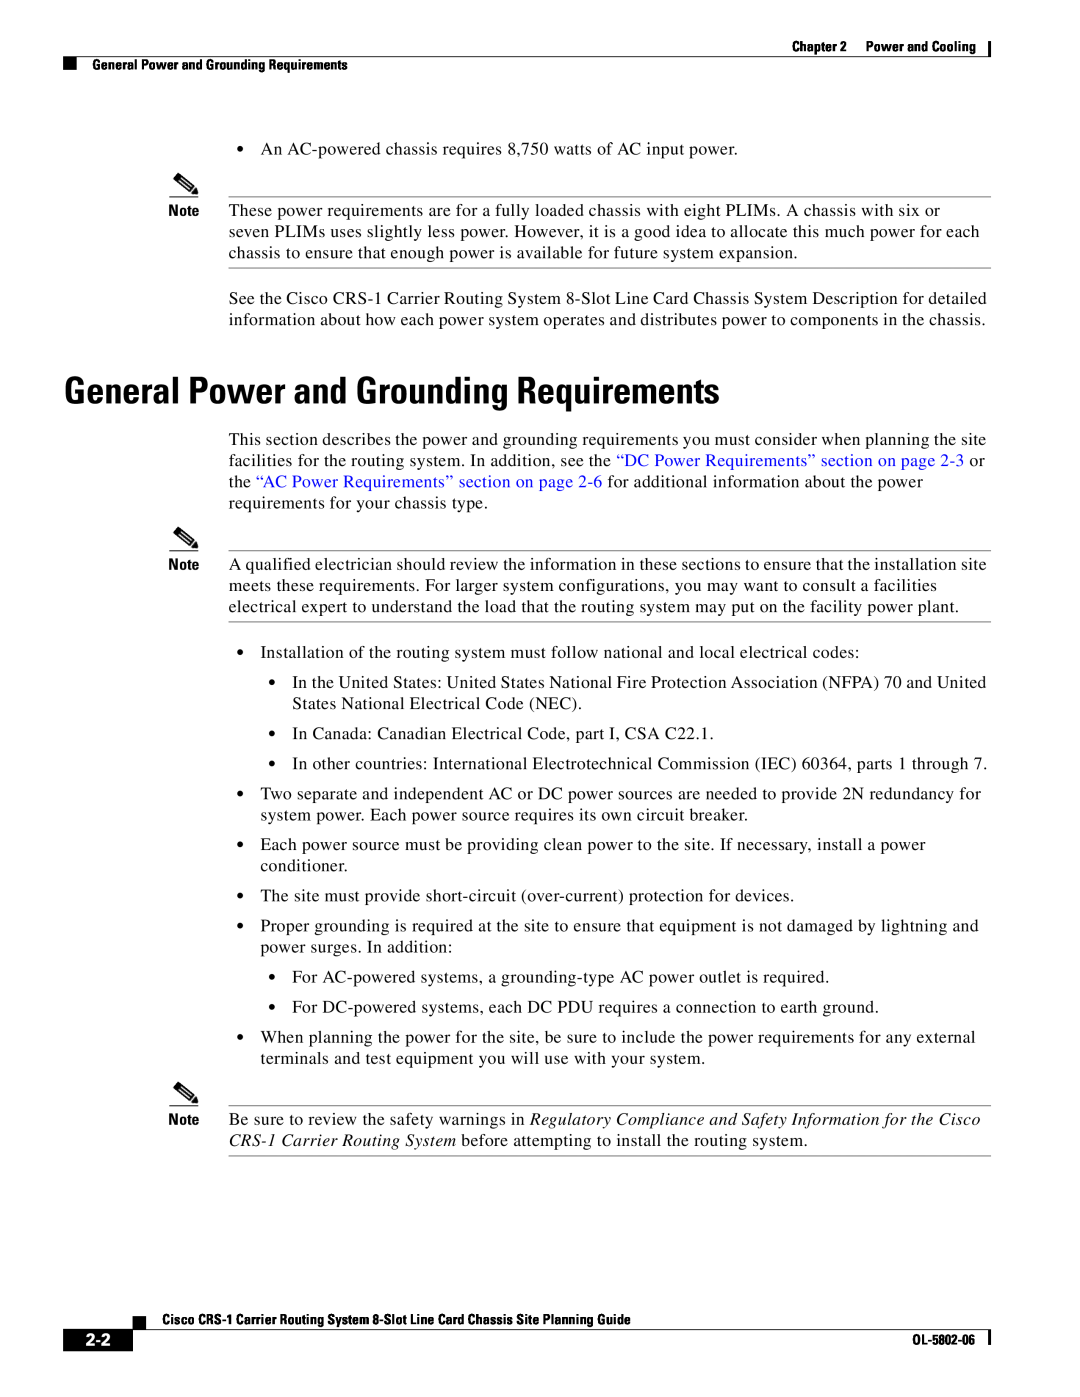 Cisco Systems CRS-1 manual General Power and Grounding Requirements 